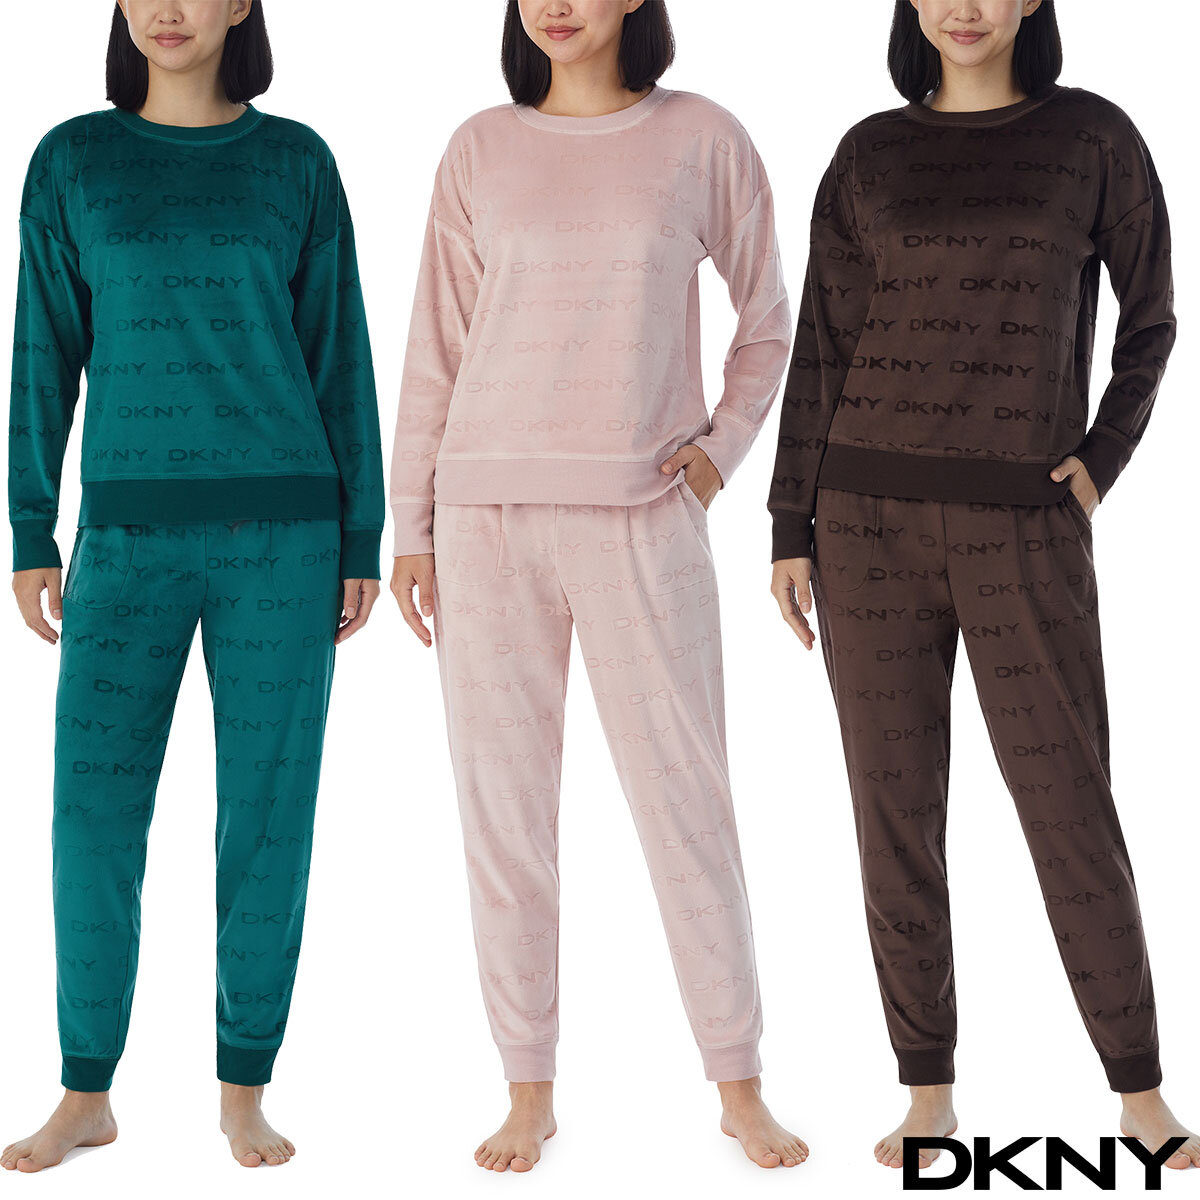 DKNY Ladies Lounge Set in 4 Colours and 4 Sizes